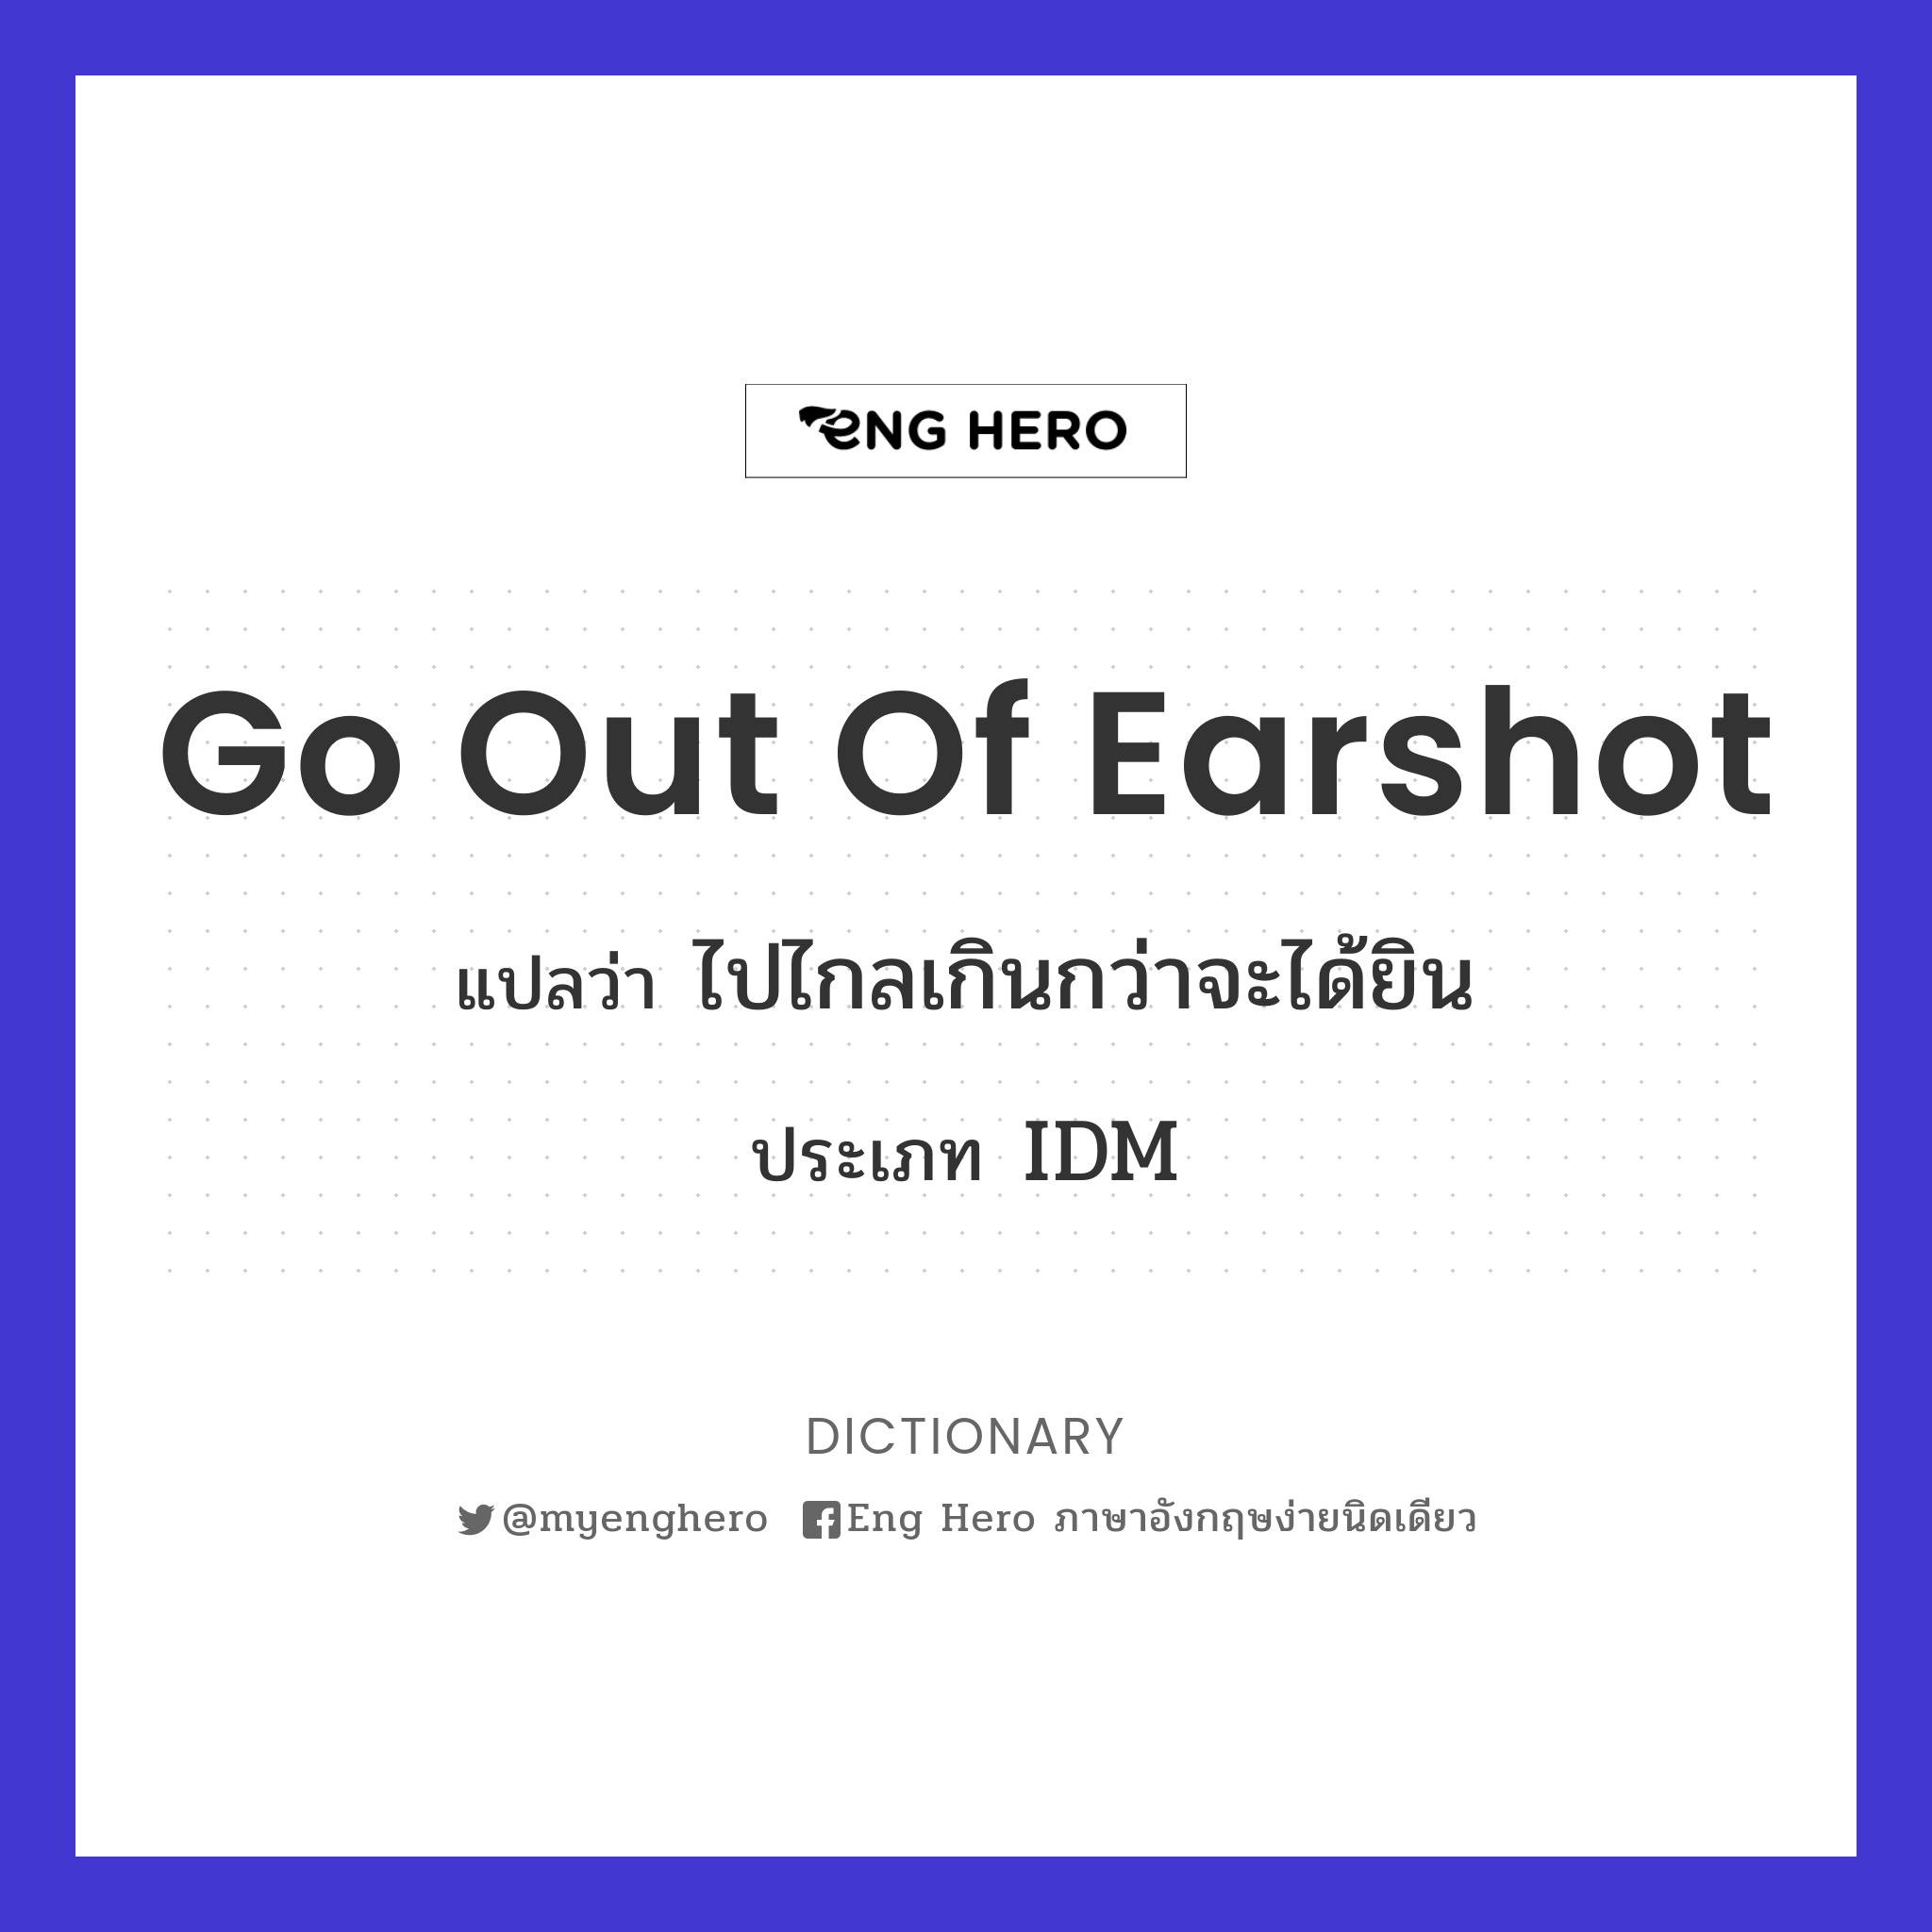 go out of earshot